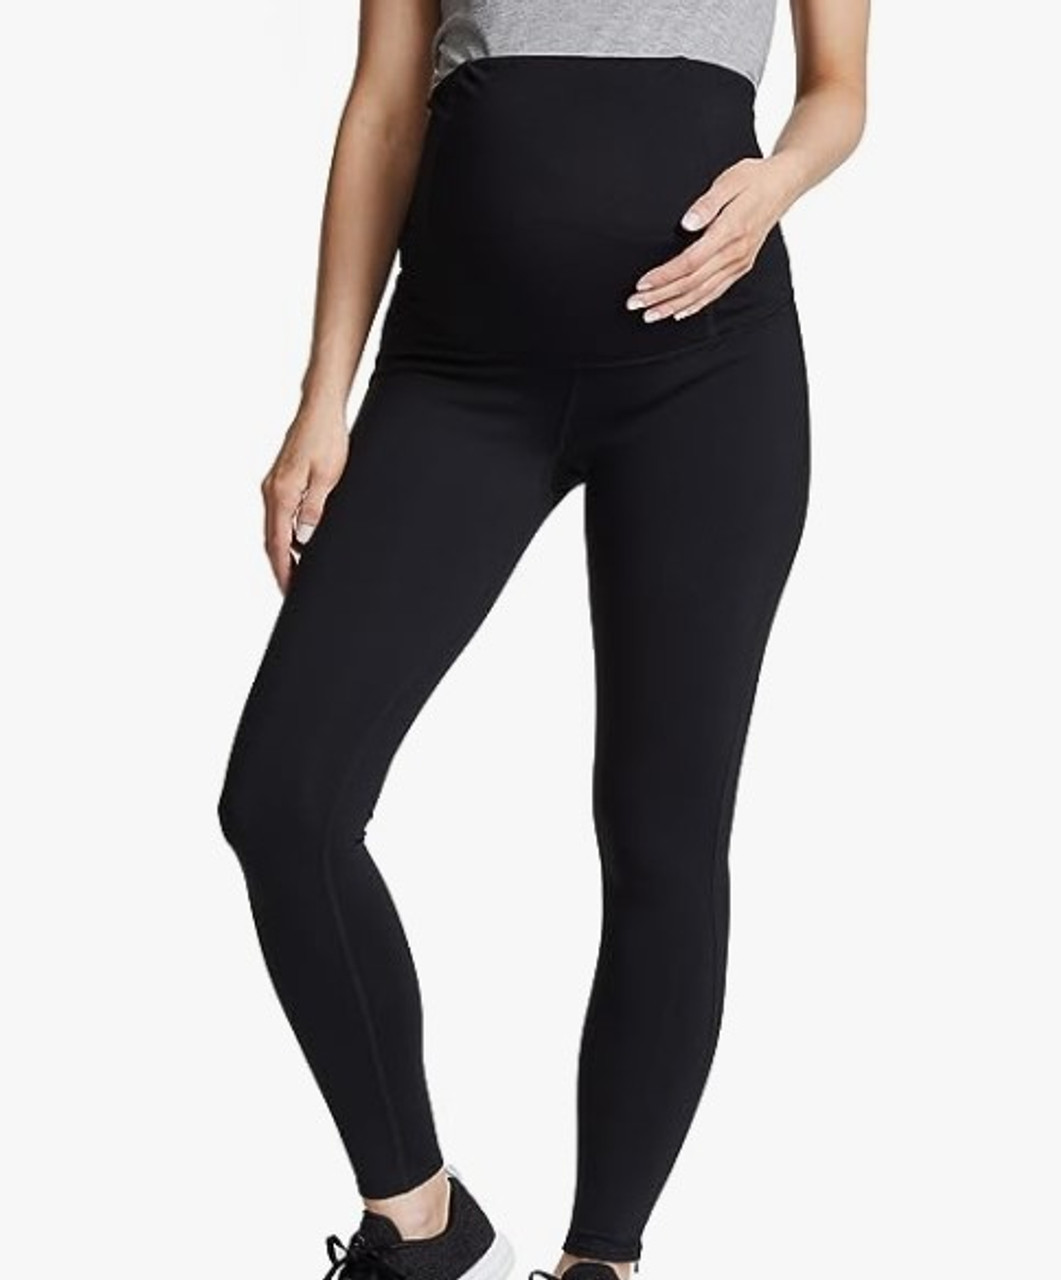 https://cdn11.bigcommerce.com/s-r23r6d/images/stencil/1280x1280/products/12354/24814/Ingrid-Isabel-Maternity-Legging-Crossover-_Excellent_Used_Condition__70977.1690485215.jpg?c=2?imbypass=on